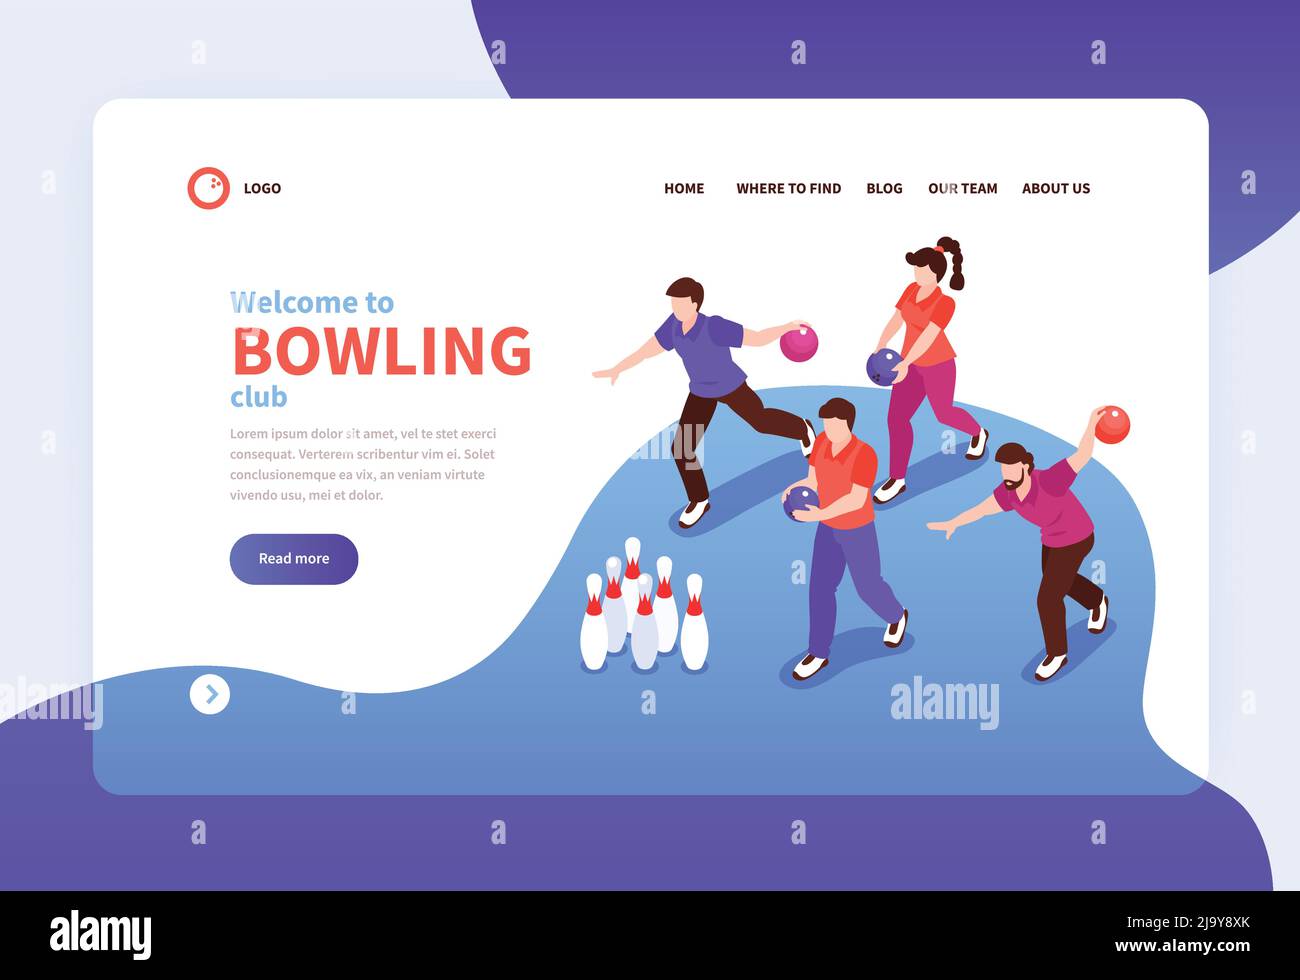 Bowling club isometric landing page welcoming new members with competing bowlers knocking down pins banner vector illustration Stock Vector